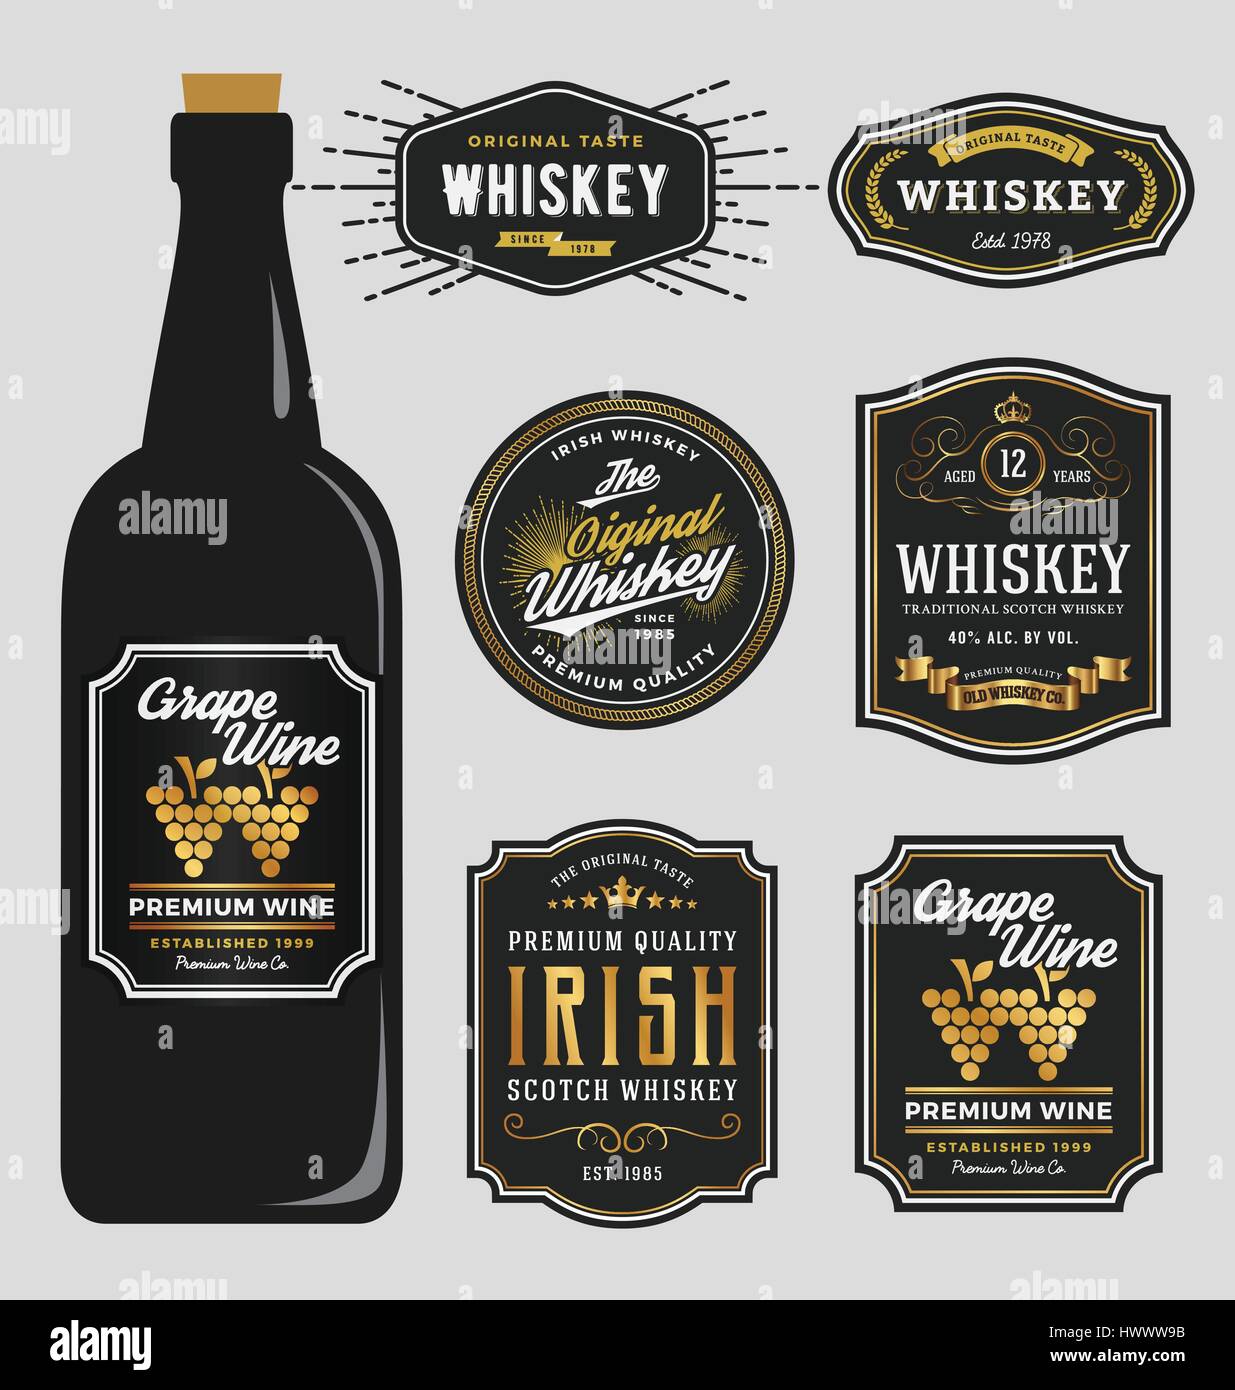 Vintage Premium Whiskey Brands Label Design Template, Resize able and free font used. Vector illustration Stock Vector